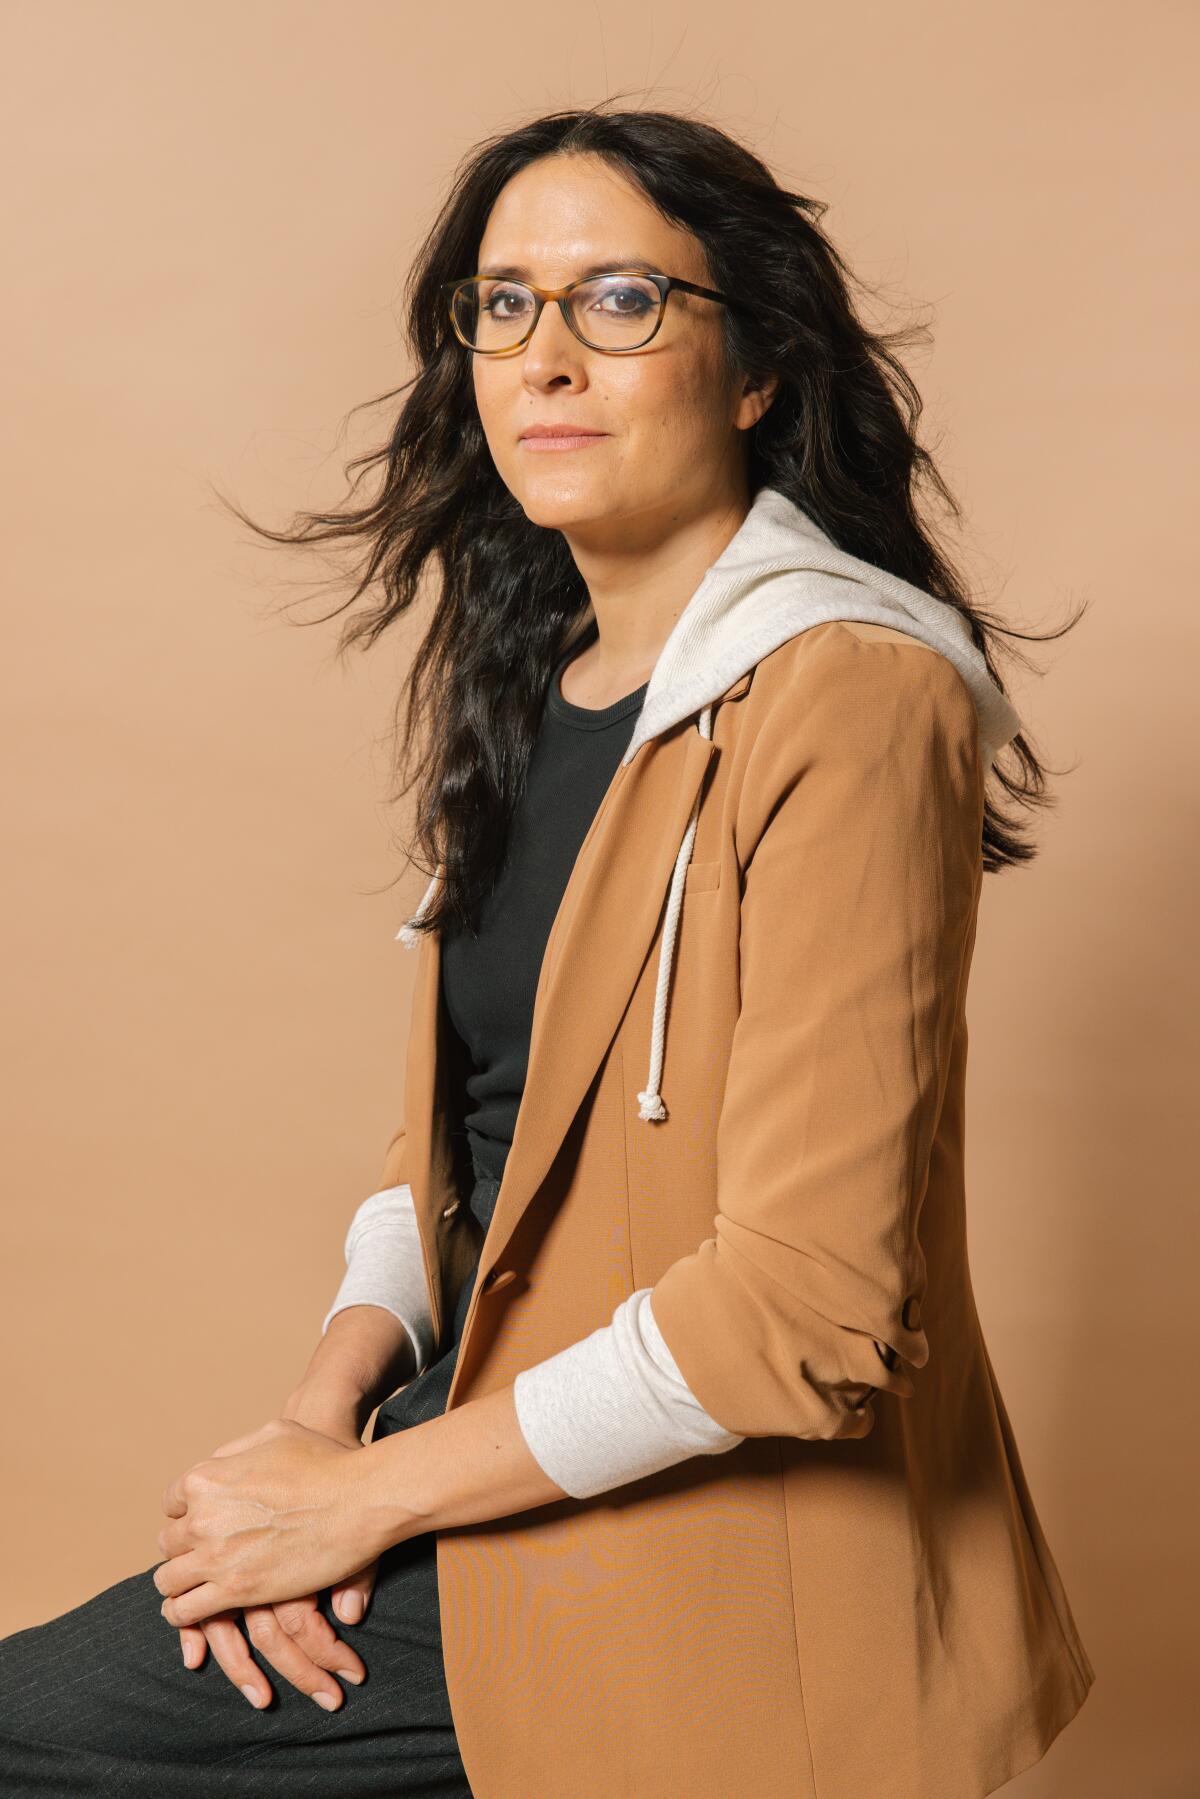 A woman with glasses and long hair looks at the camera.